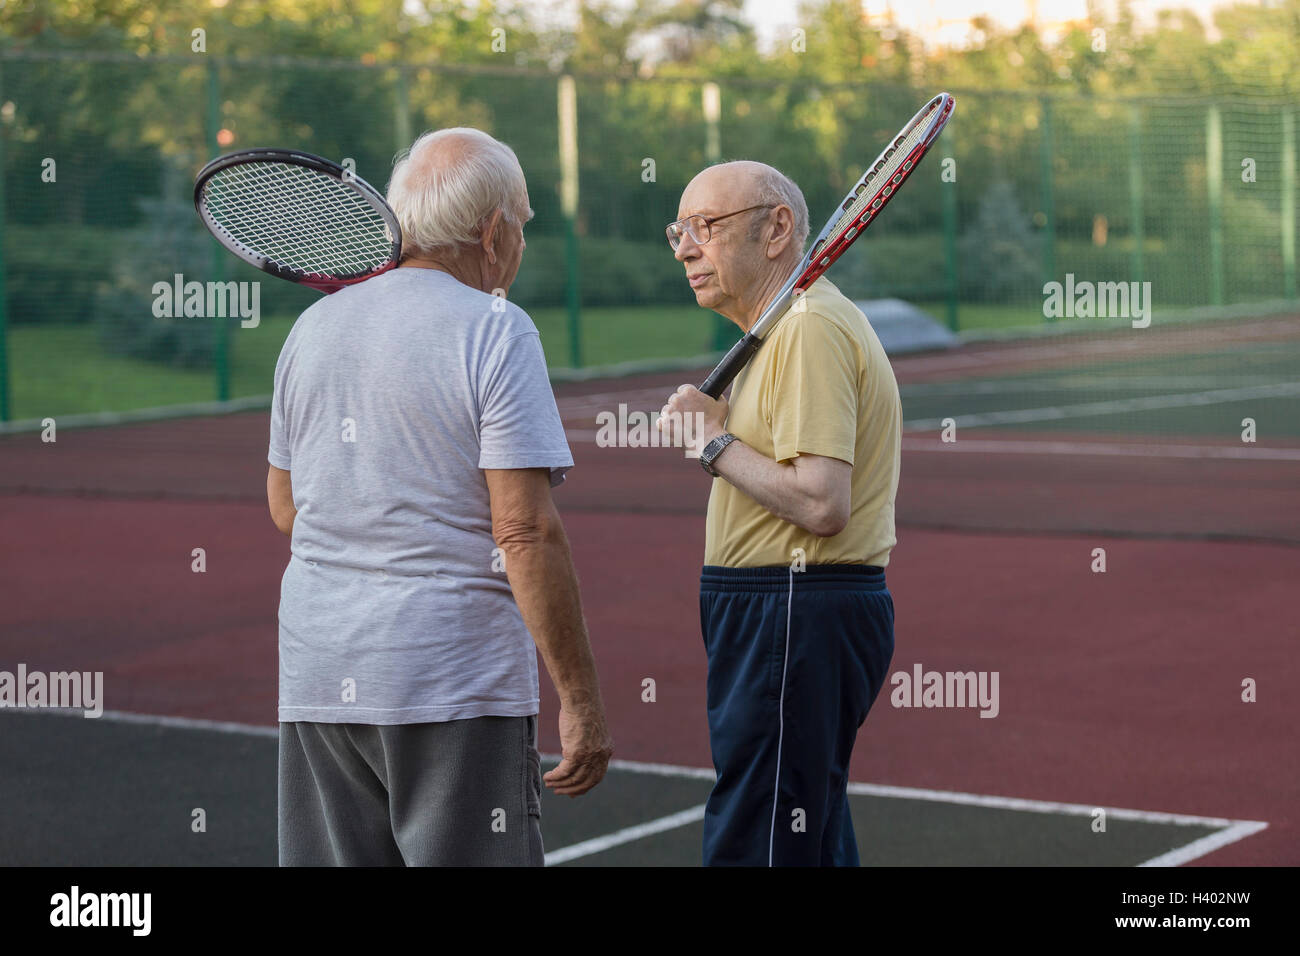 Senior friends carrying tennis rackets while talking at playing field Stock Photo